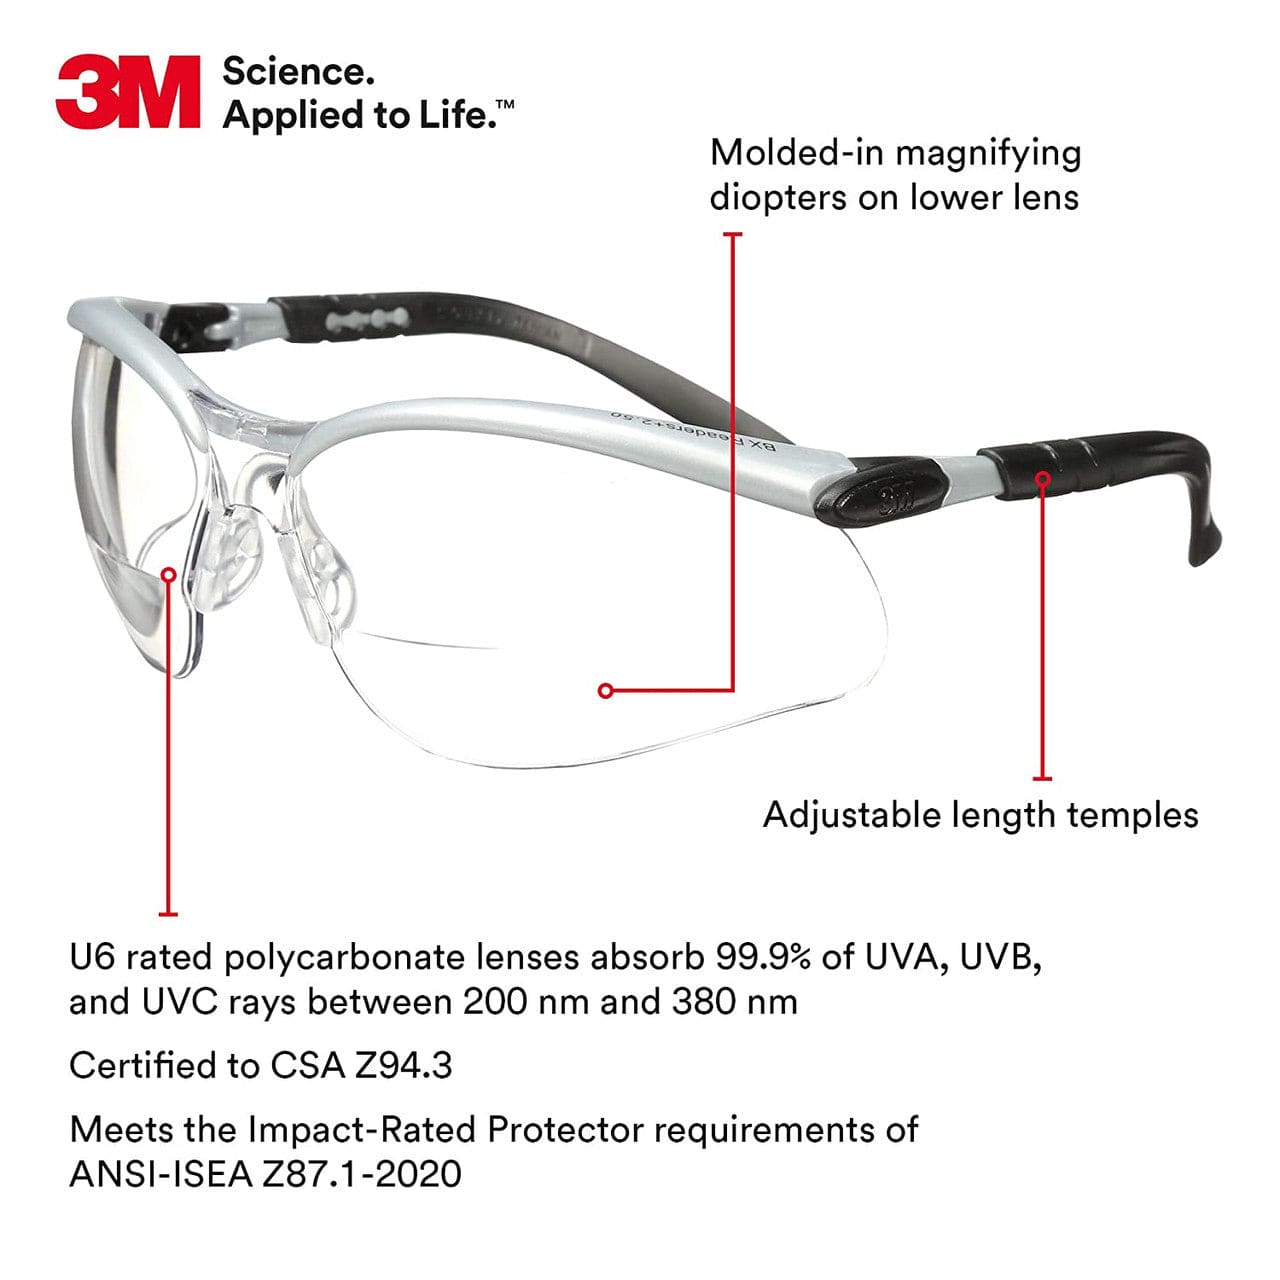 3M BX Bifocal Safety Glasses With Clear Anti-Fog Lens Key Features